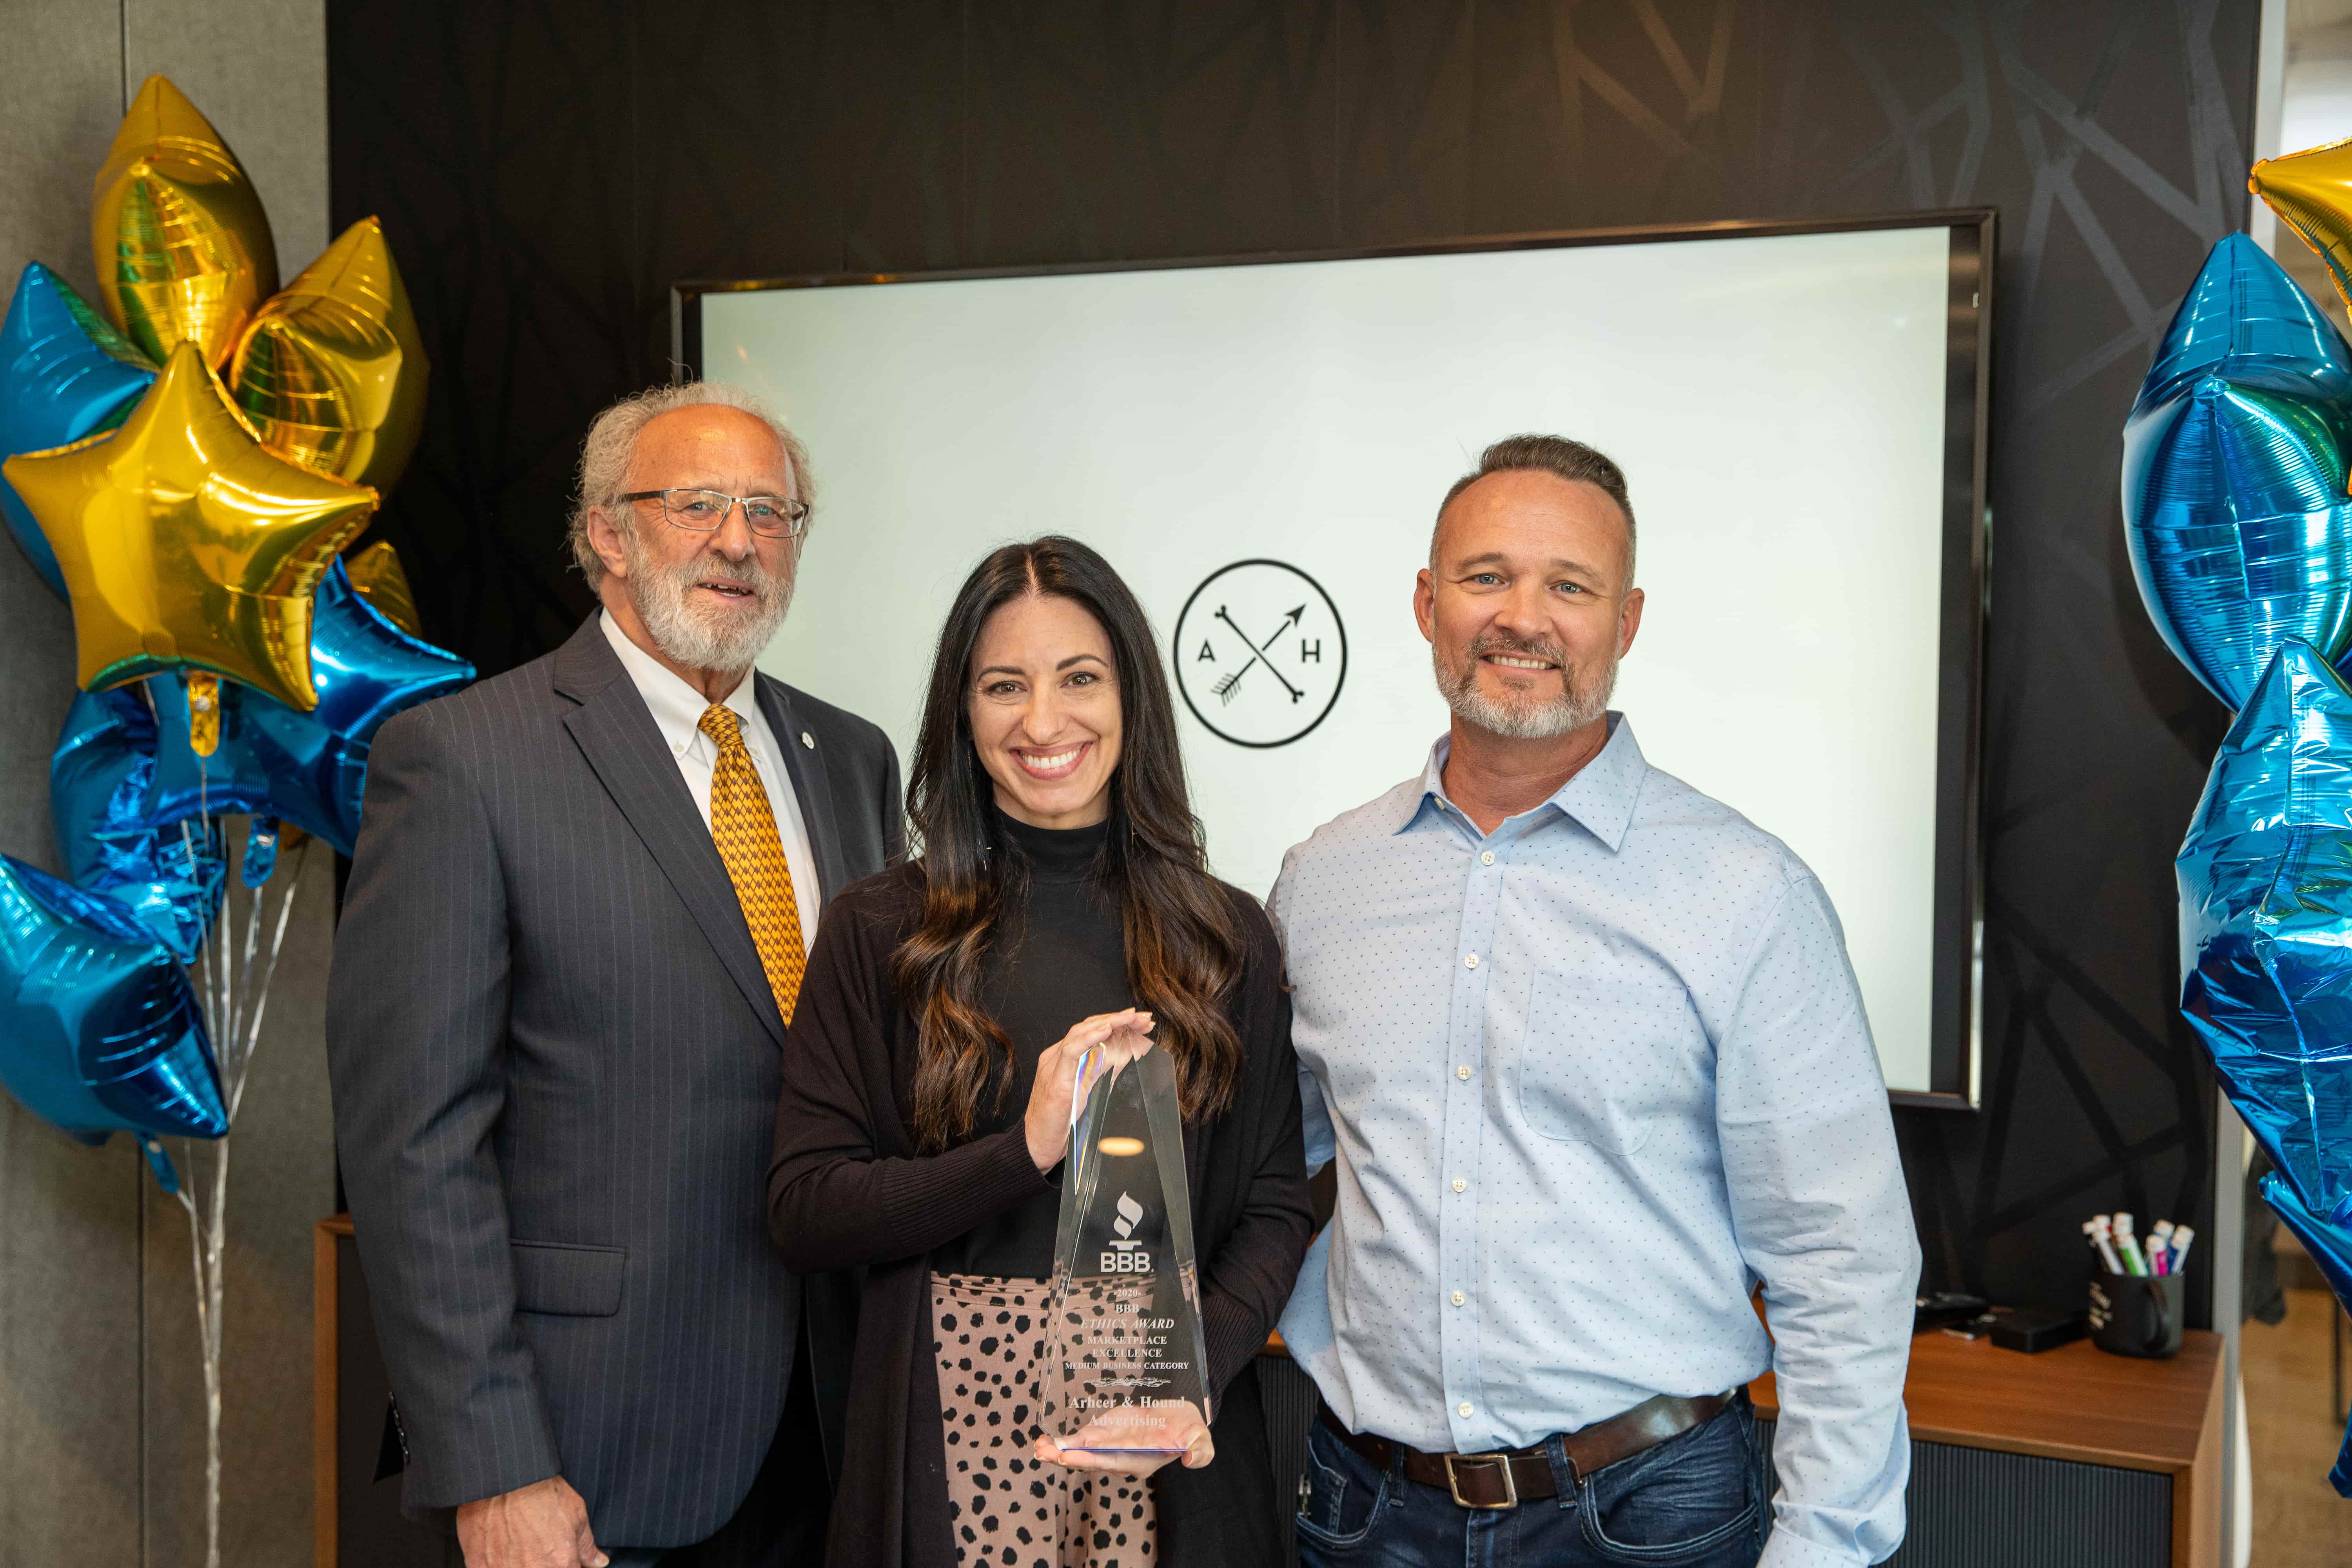 Archer & Hound co-owners Jessica Blanchfield and David Blanchfield smiling at the camera with Better Business Bureau President and CEO Blair Looney during a presentation of Archer & Hound's Ethics Award in 2021